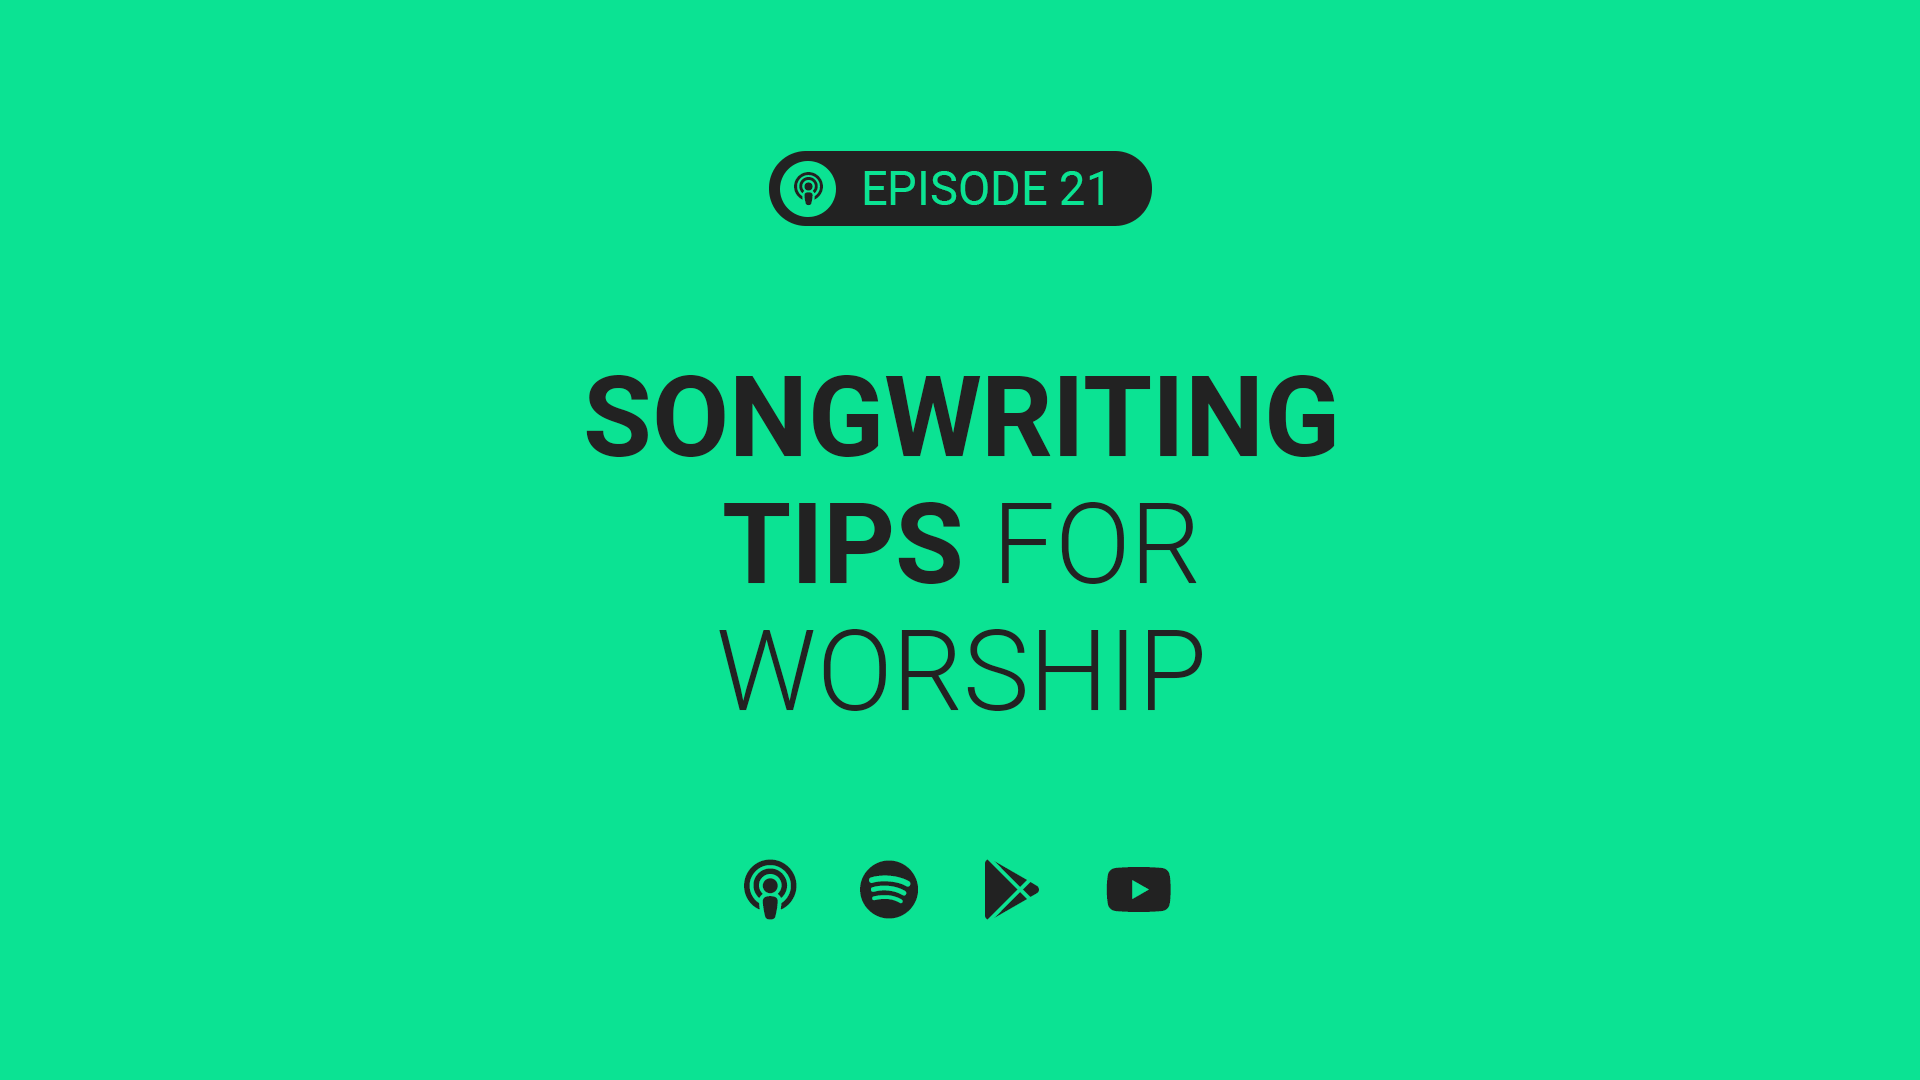 Songwriting Tips for Worship